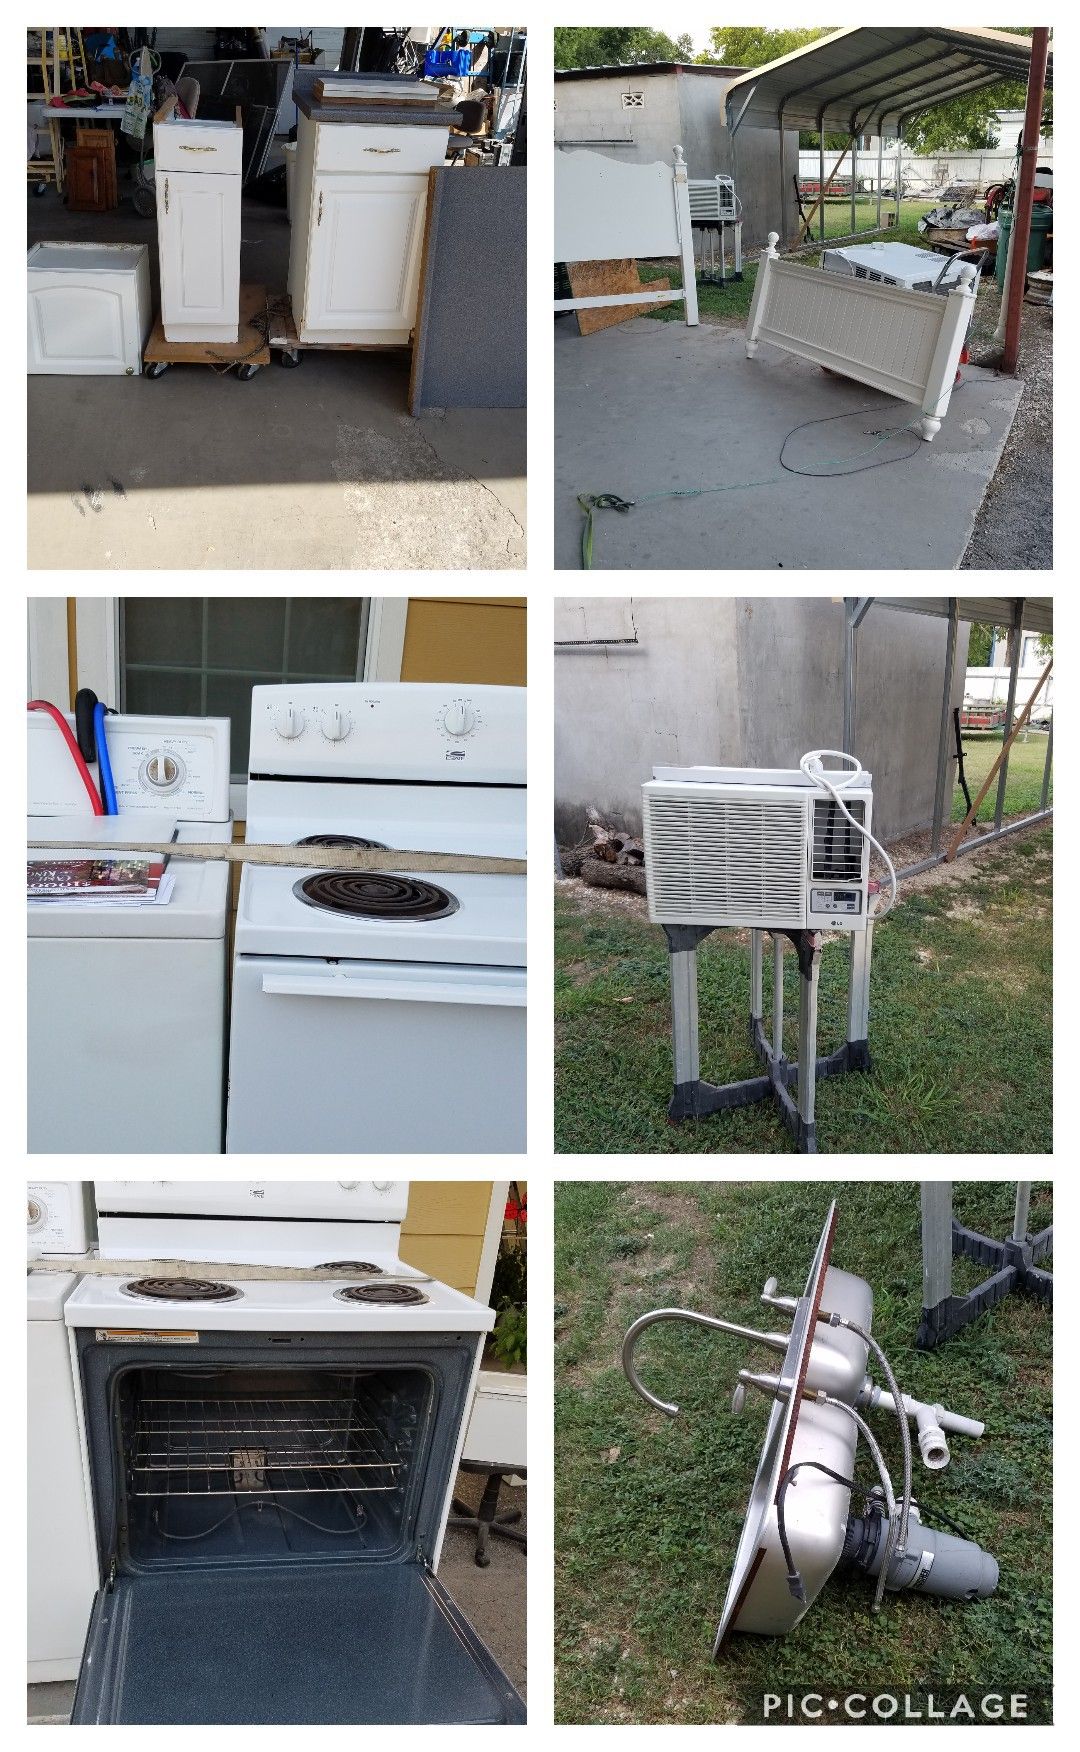 Appliances, stove elect $75, washer $75, dryer $75. Bed(queen head & footboard & frame $50, kitchen sink SS double w/ faucet $50, kit. Cabinets $100